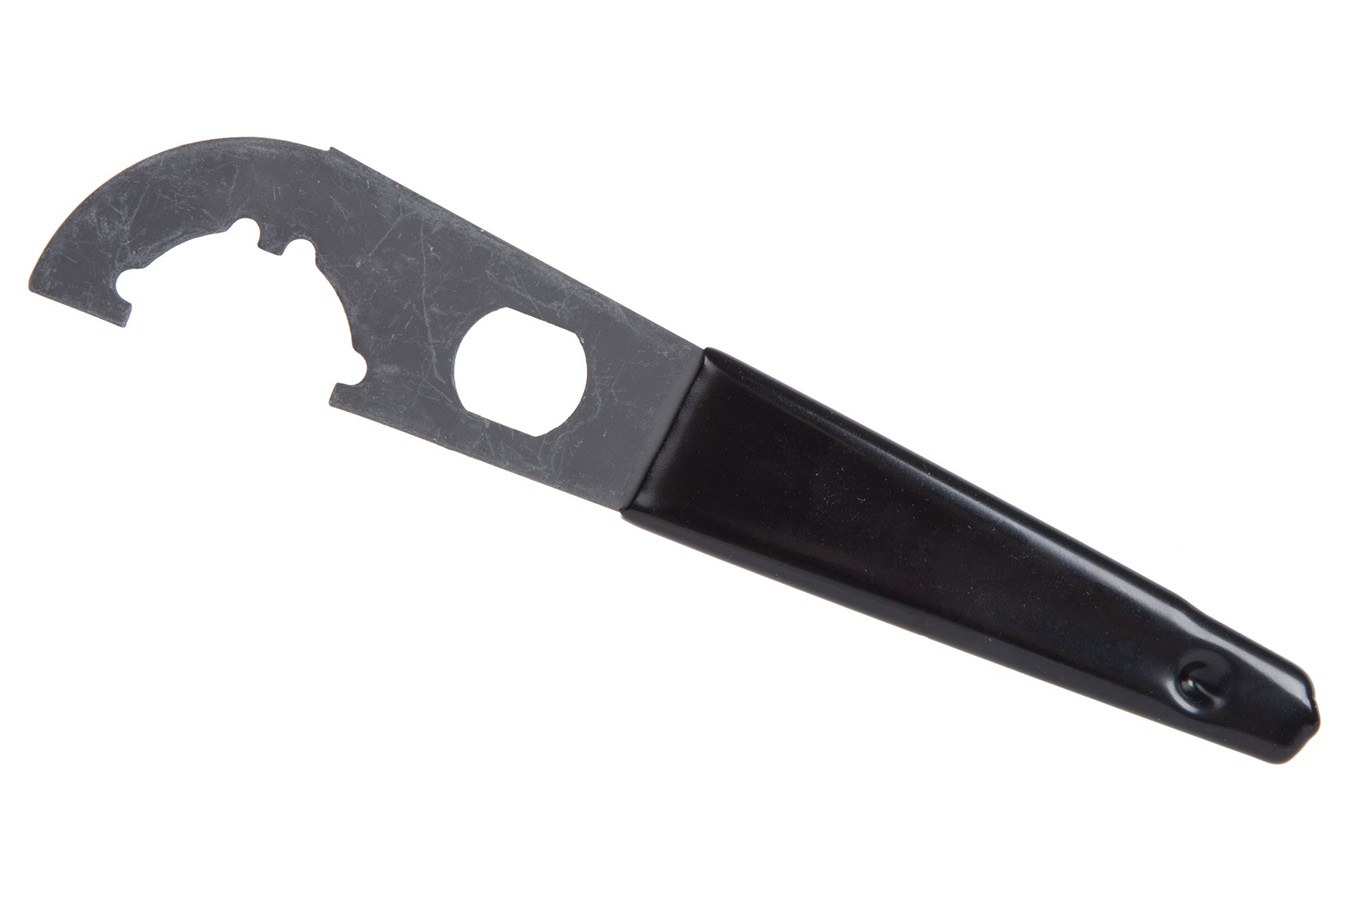 ROCK RIVER ARMS TACTICAL CAR STOCK WRENCH